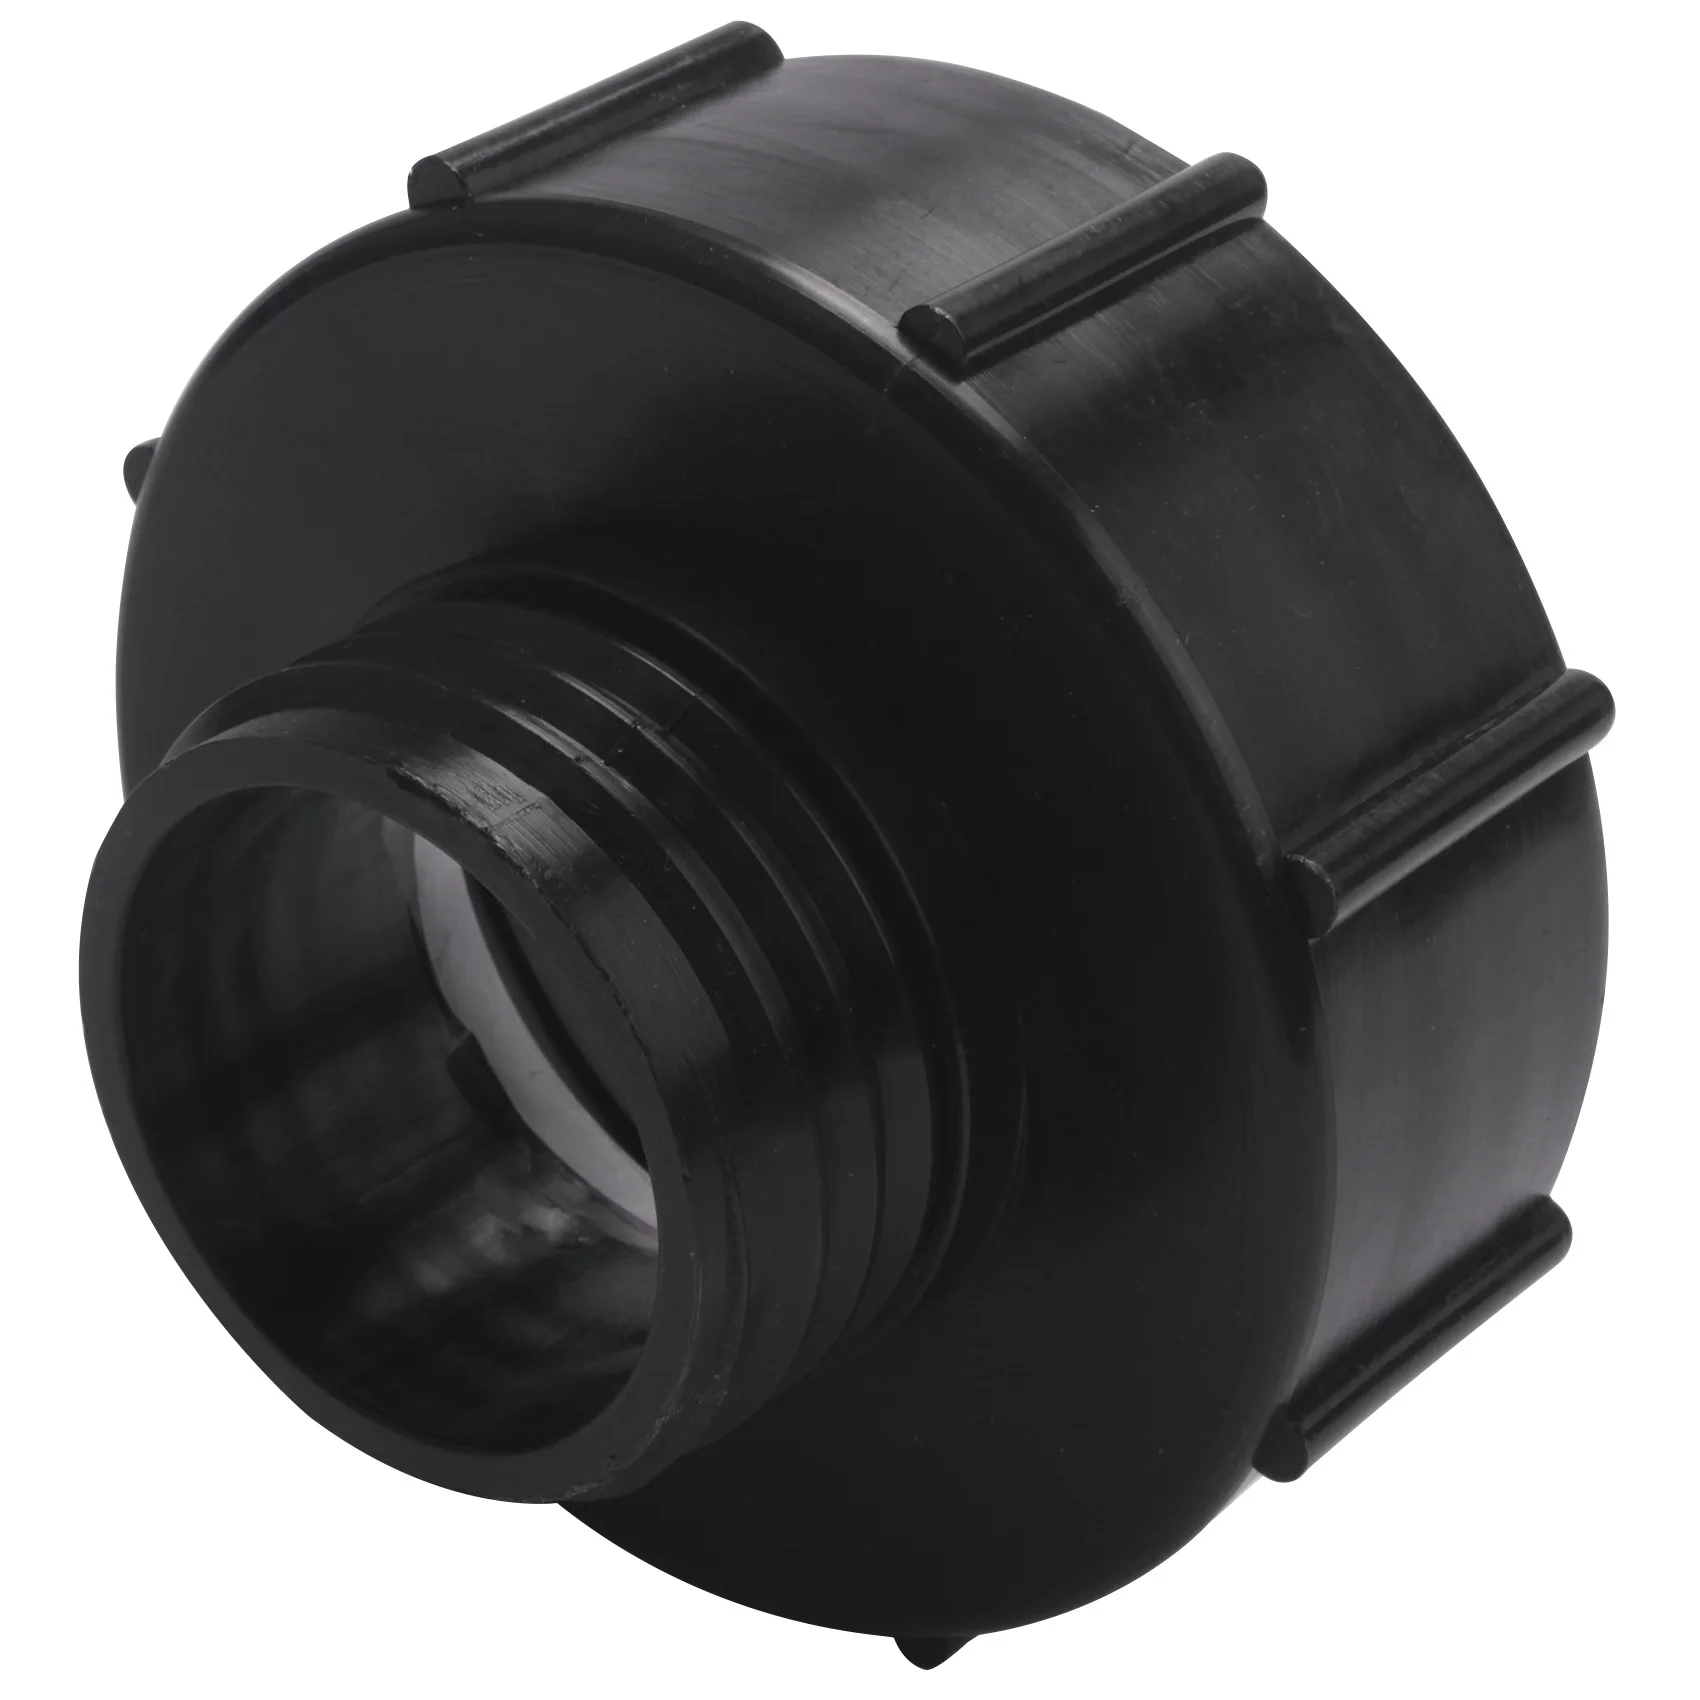 

IBC Adapter S100X8 to Reduce S60X6 IBC Tank Connector Adapter Replacement Garden Water Connectors